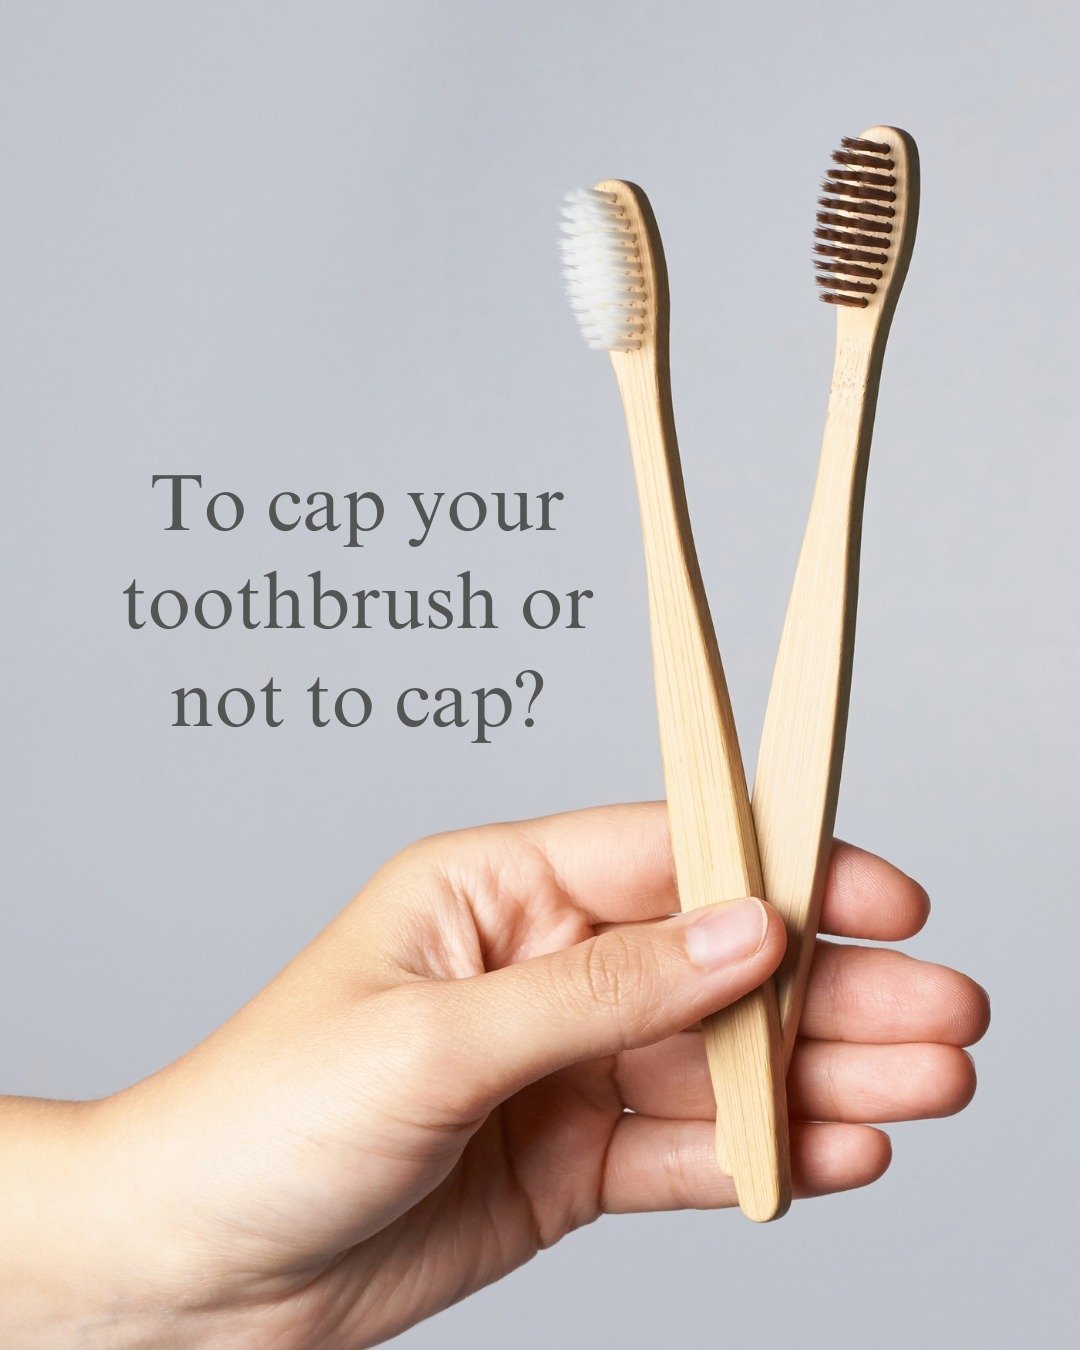 🚫🦠 Don't cap that toothbrush! 🦠🚫

Did you know? Putting a cap on your toothbrush can actually create a breeding ground for bacteria, trapping moisture and promoting bacterial growth 😱 

Instead, let your toothbrush air dry upright to keep it cle